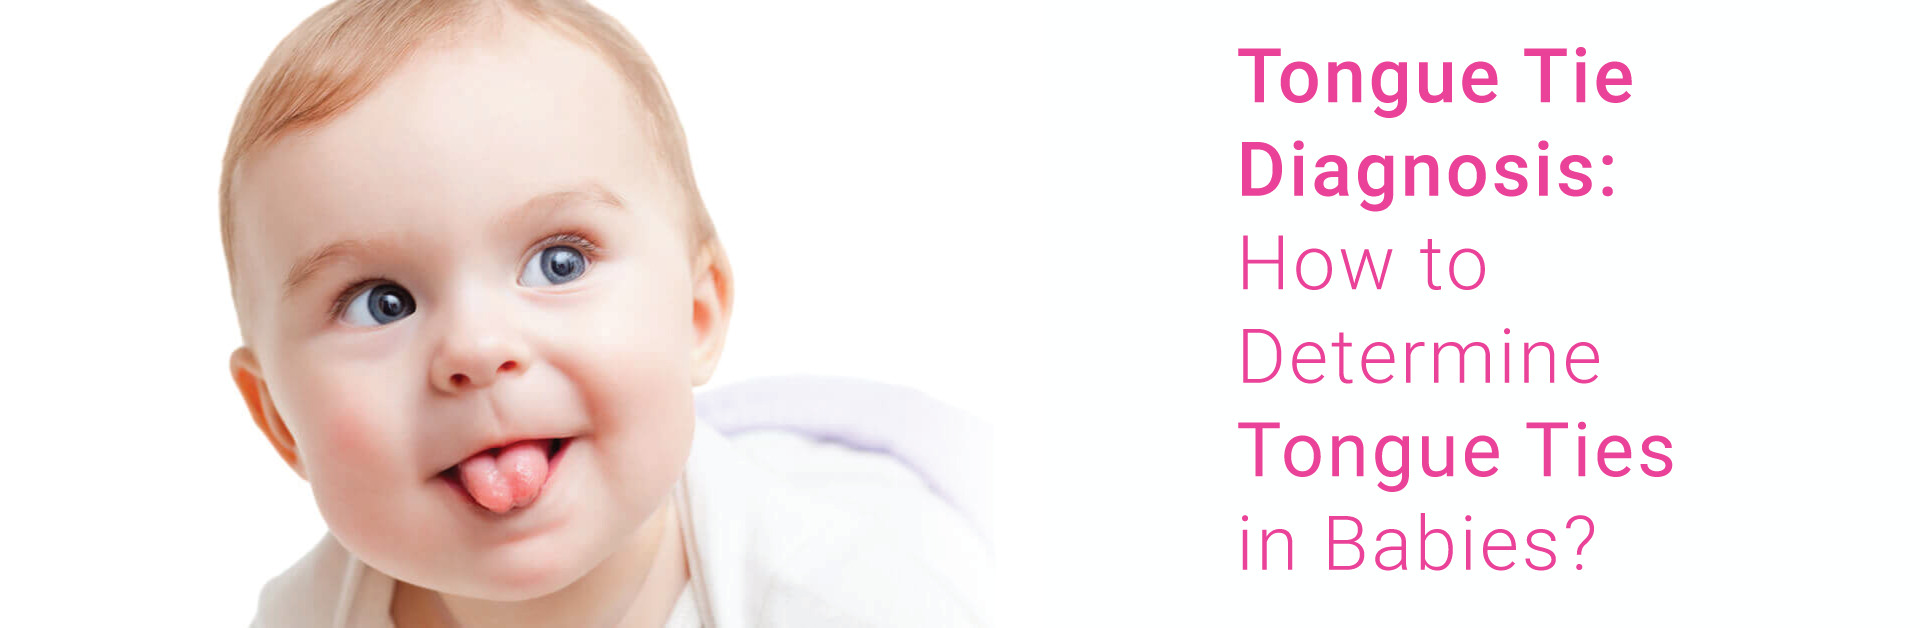 TONGUE TIE DIAGNOSIS: HOW TO DETERMINE TONGUE TIES IN BABIES?